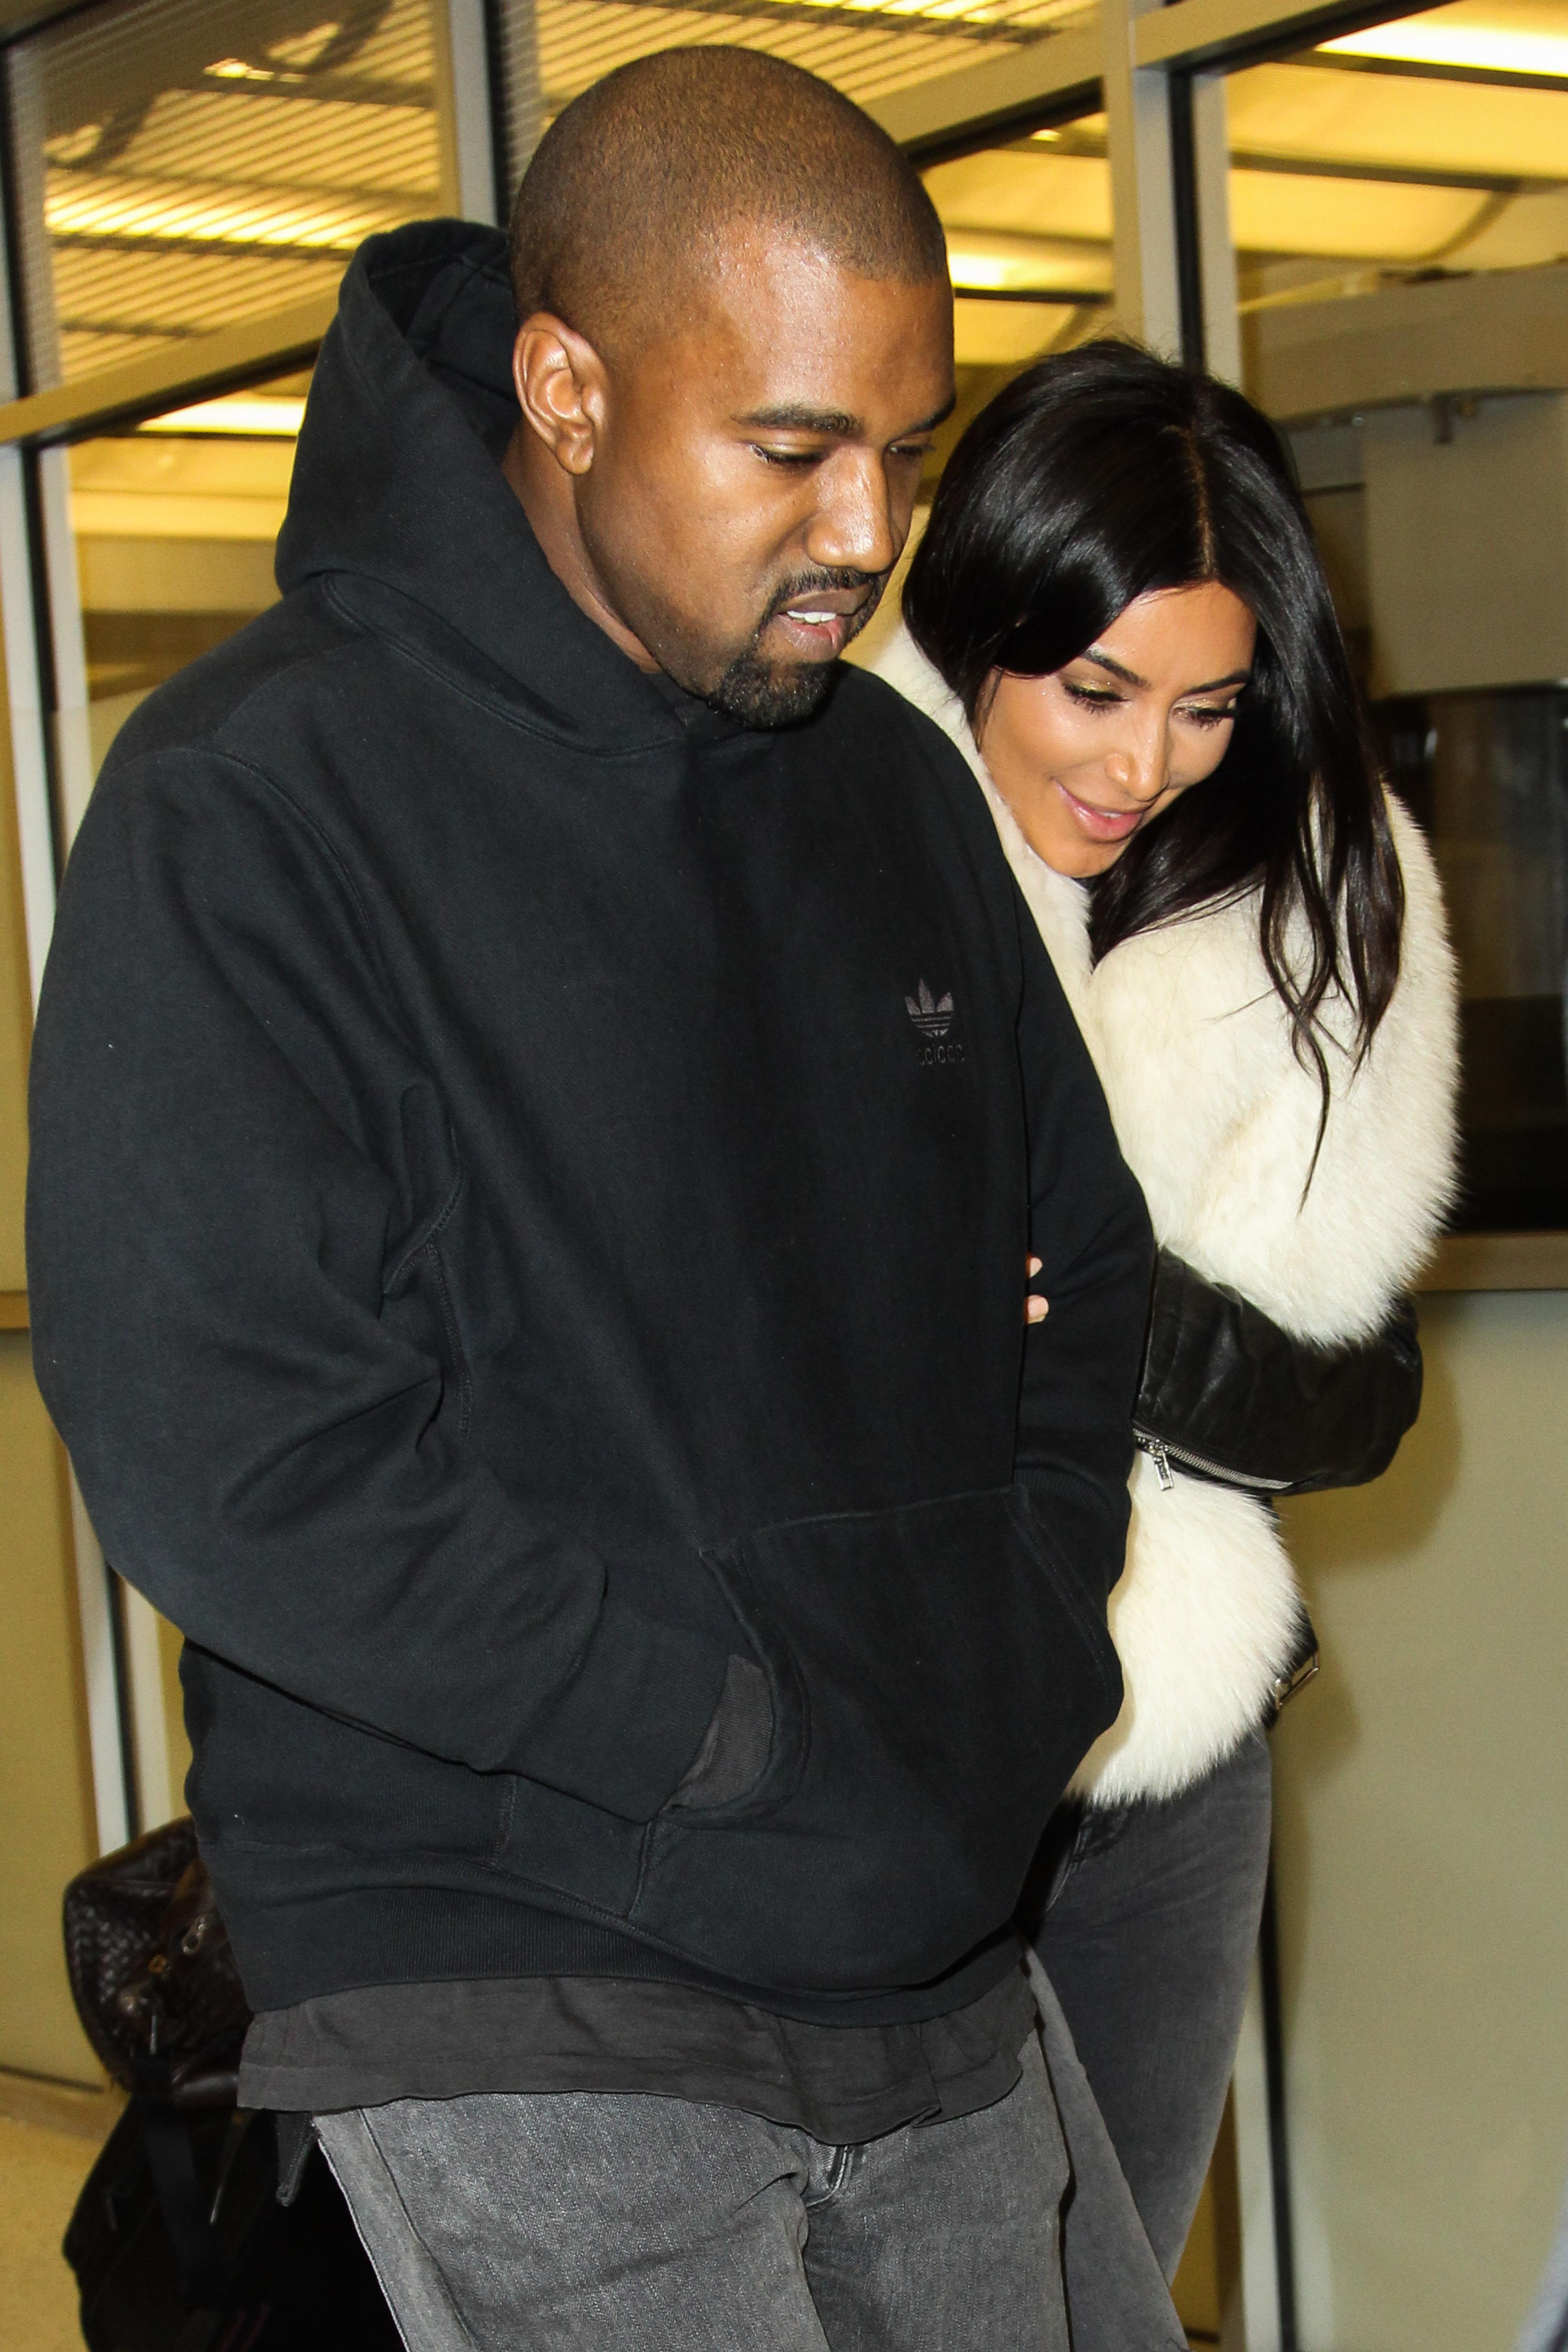 Kim Kardashian and Kanye West are seen arriving at JFK Airport